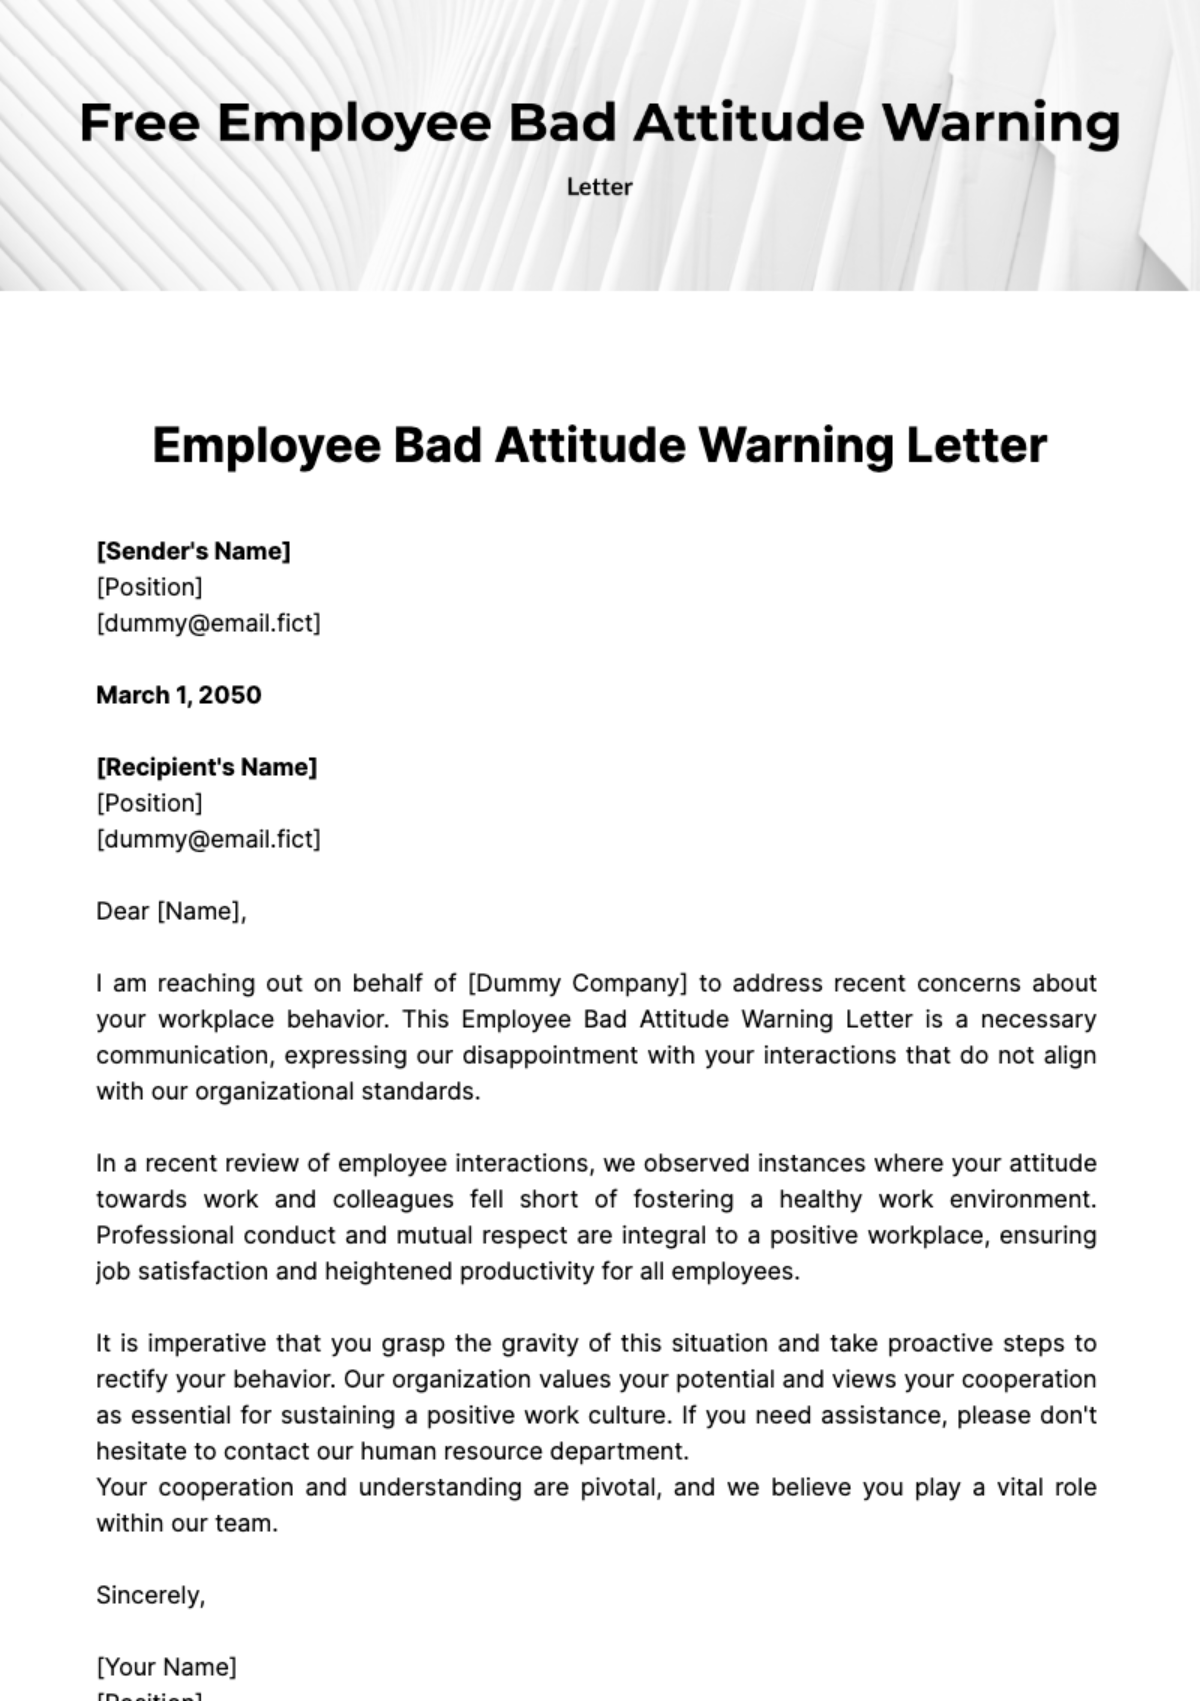 Employee Bad Attitude Warning Letter Template